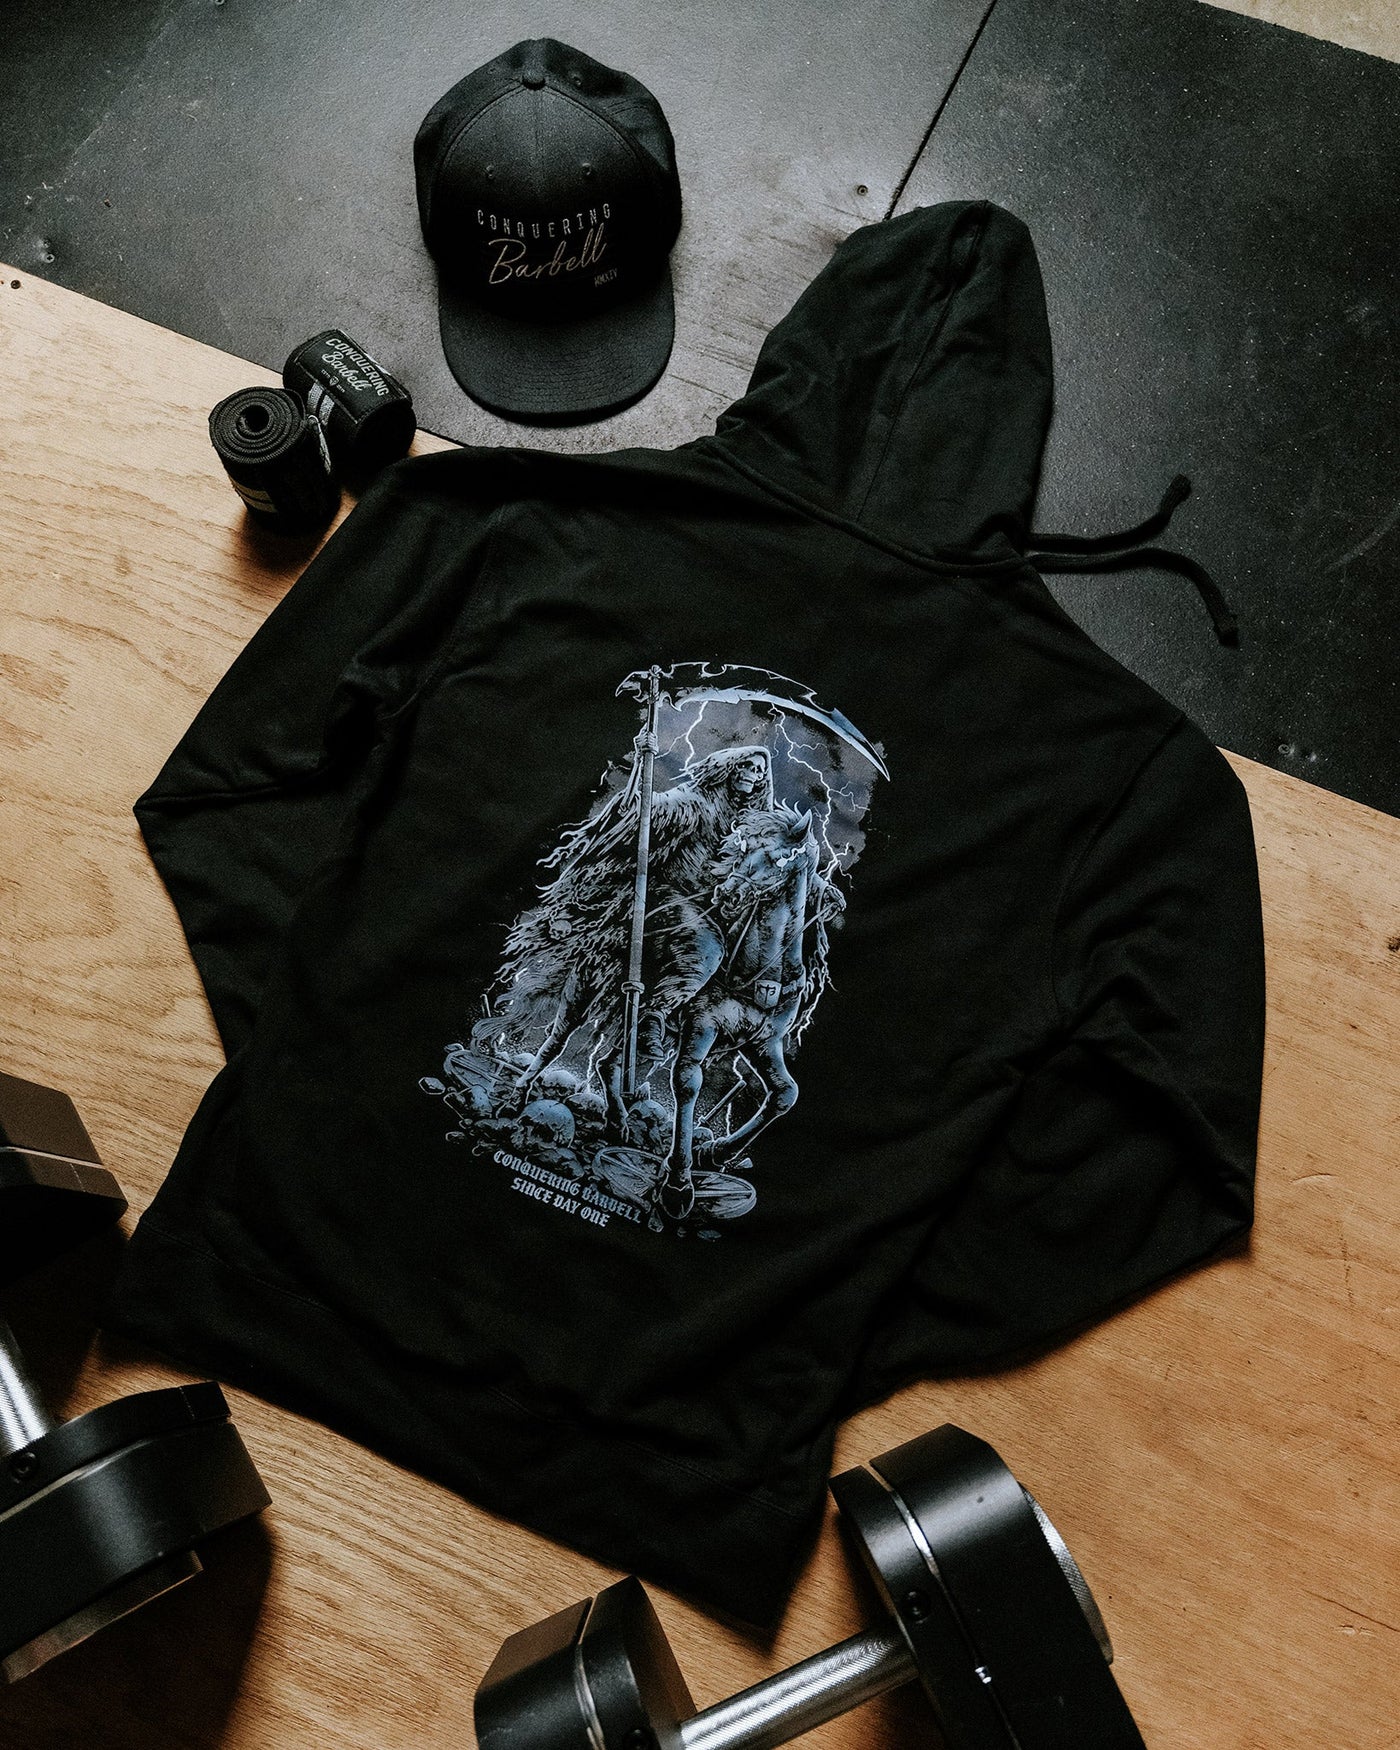 The Reaper - on Black Pullover Hoodie - Conquering Barbell